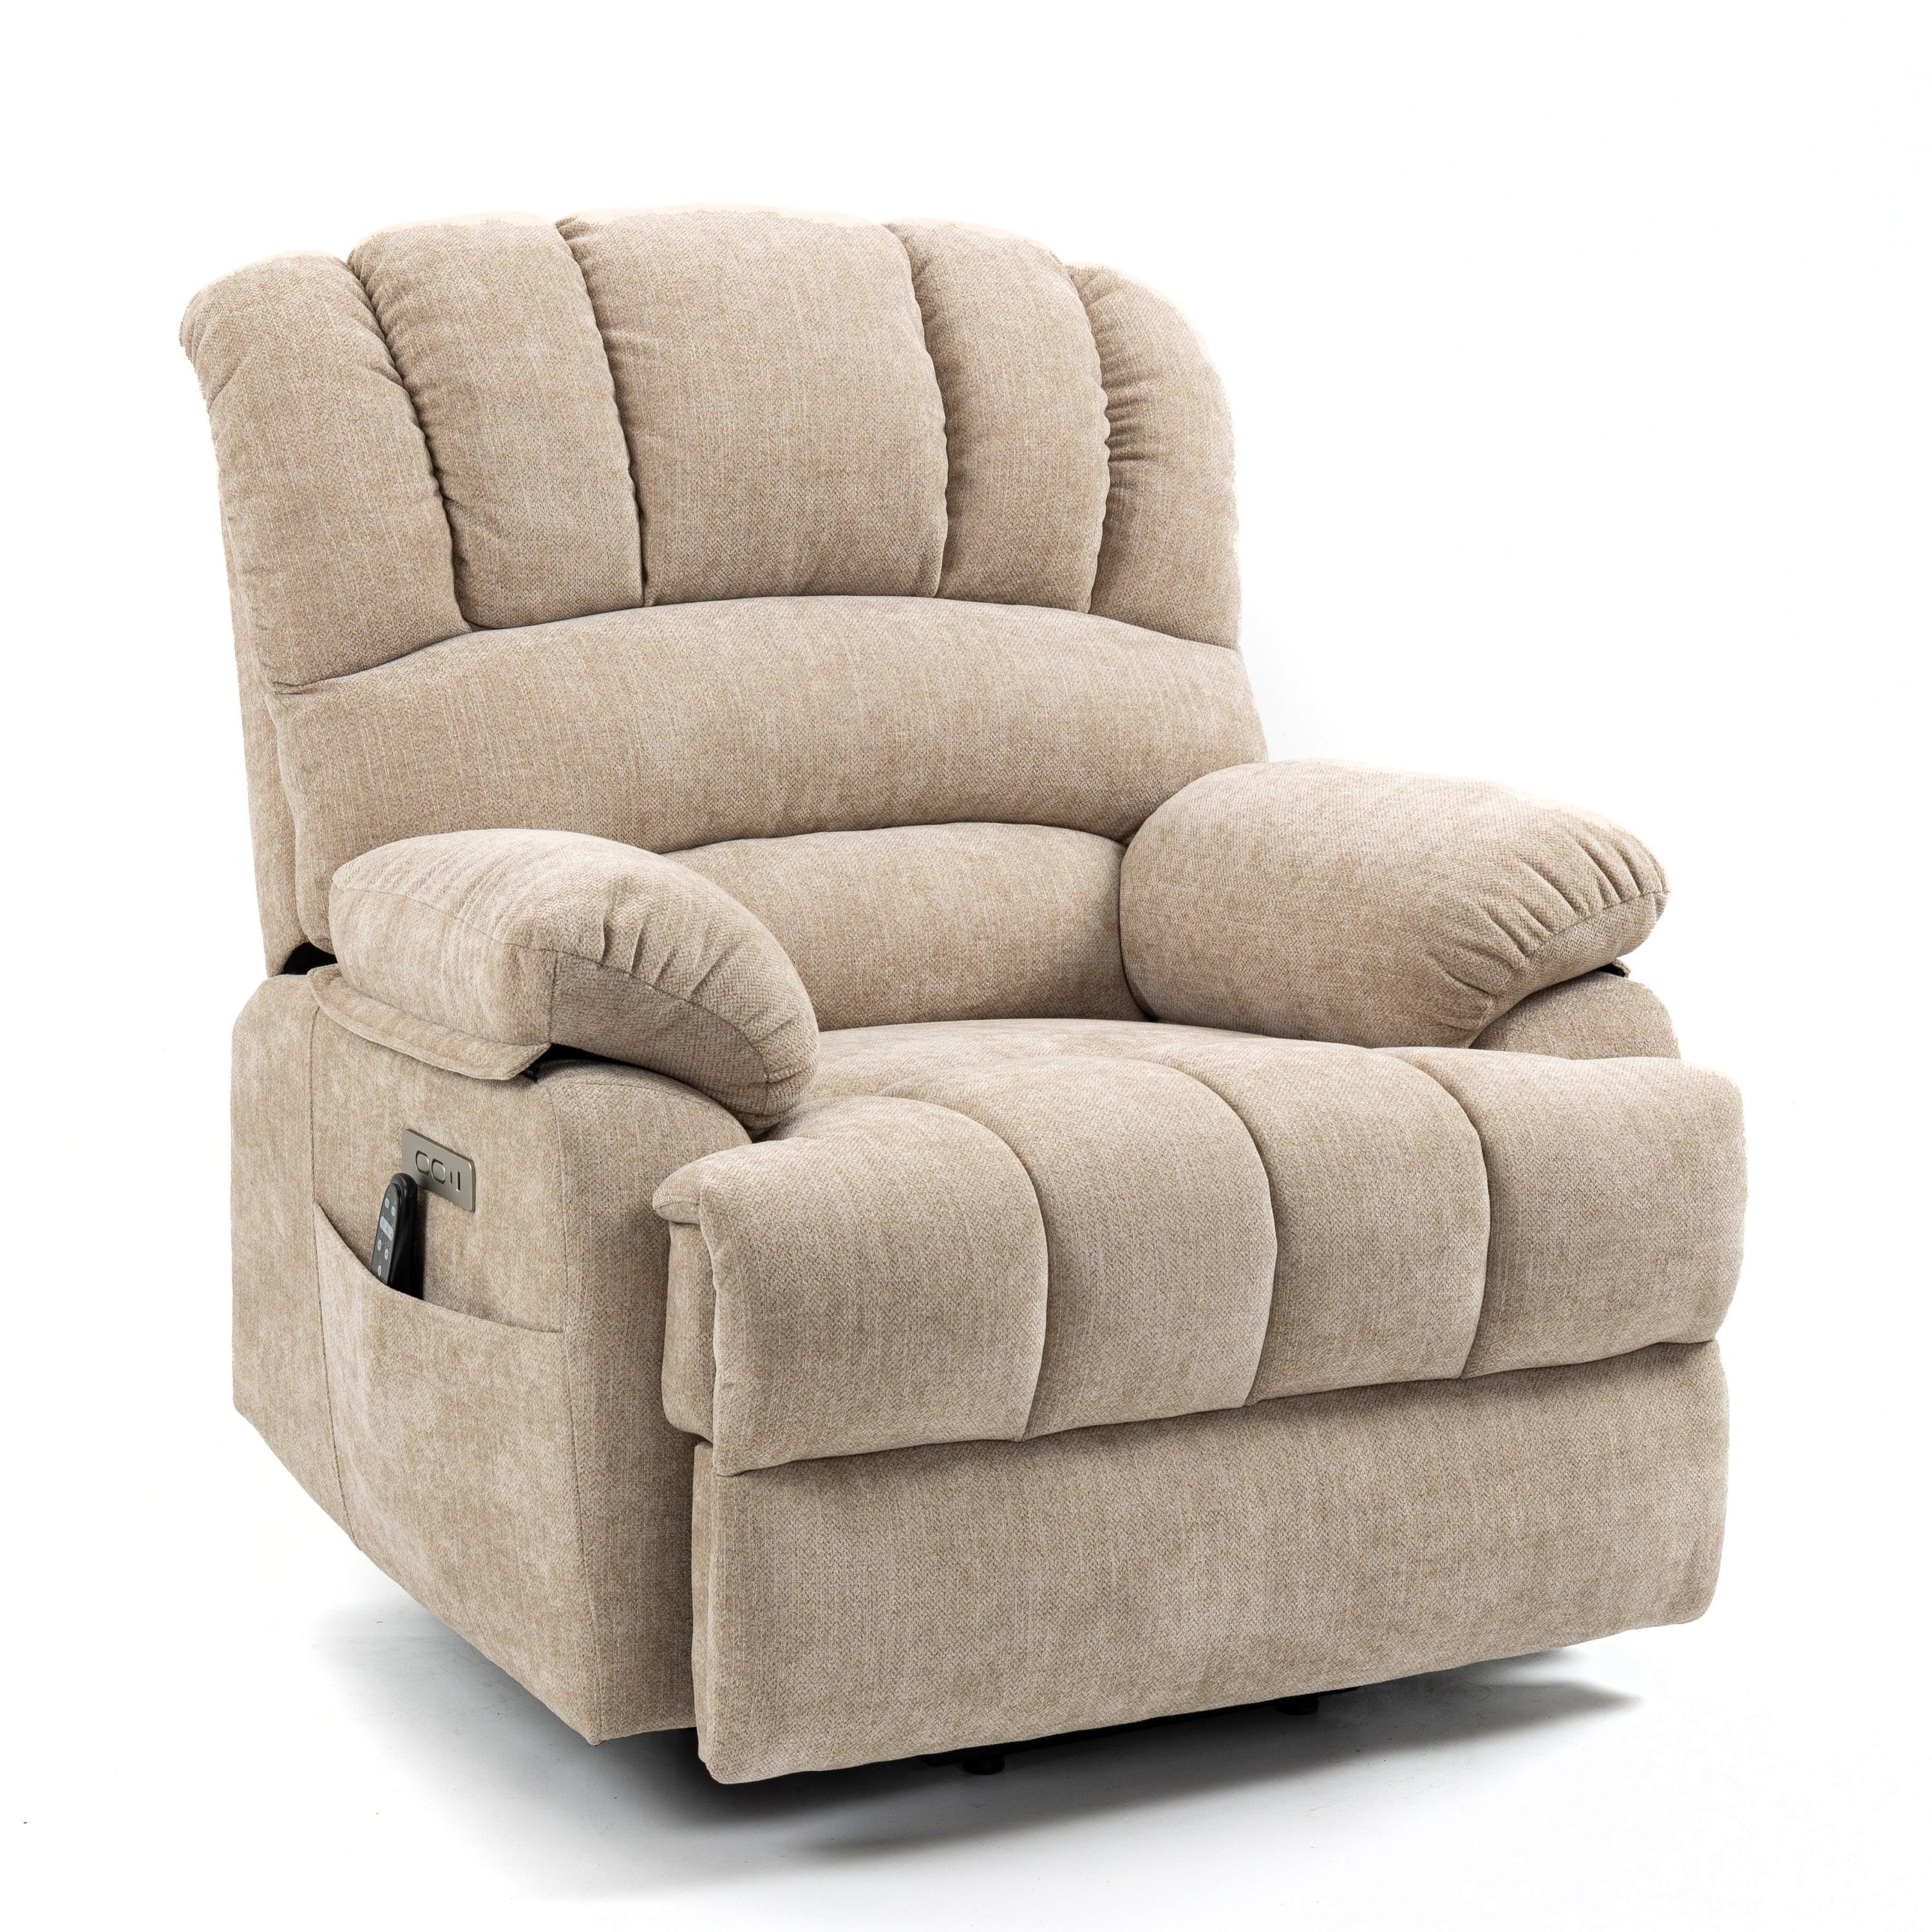 Large Power Lift Recliner Chair with Heat and Massage, seated angle view